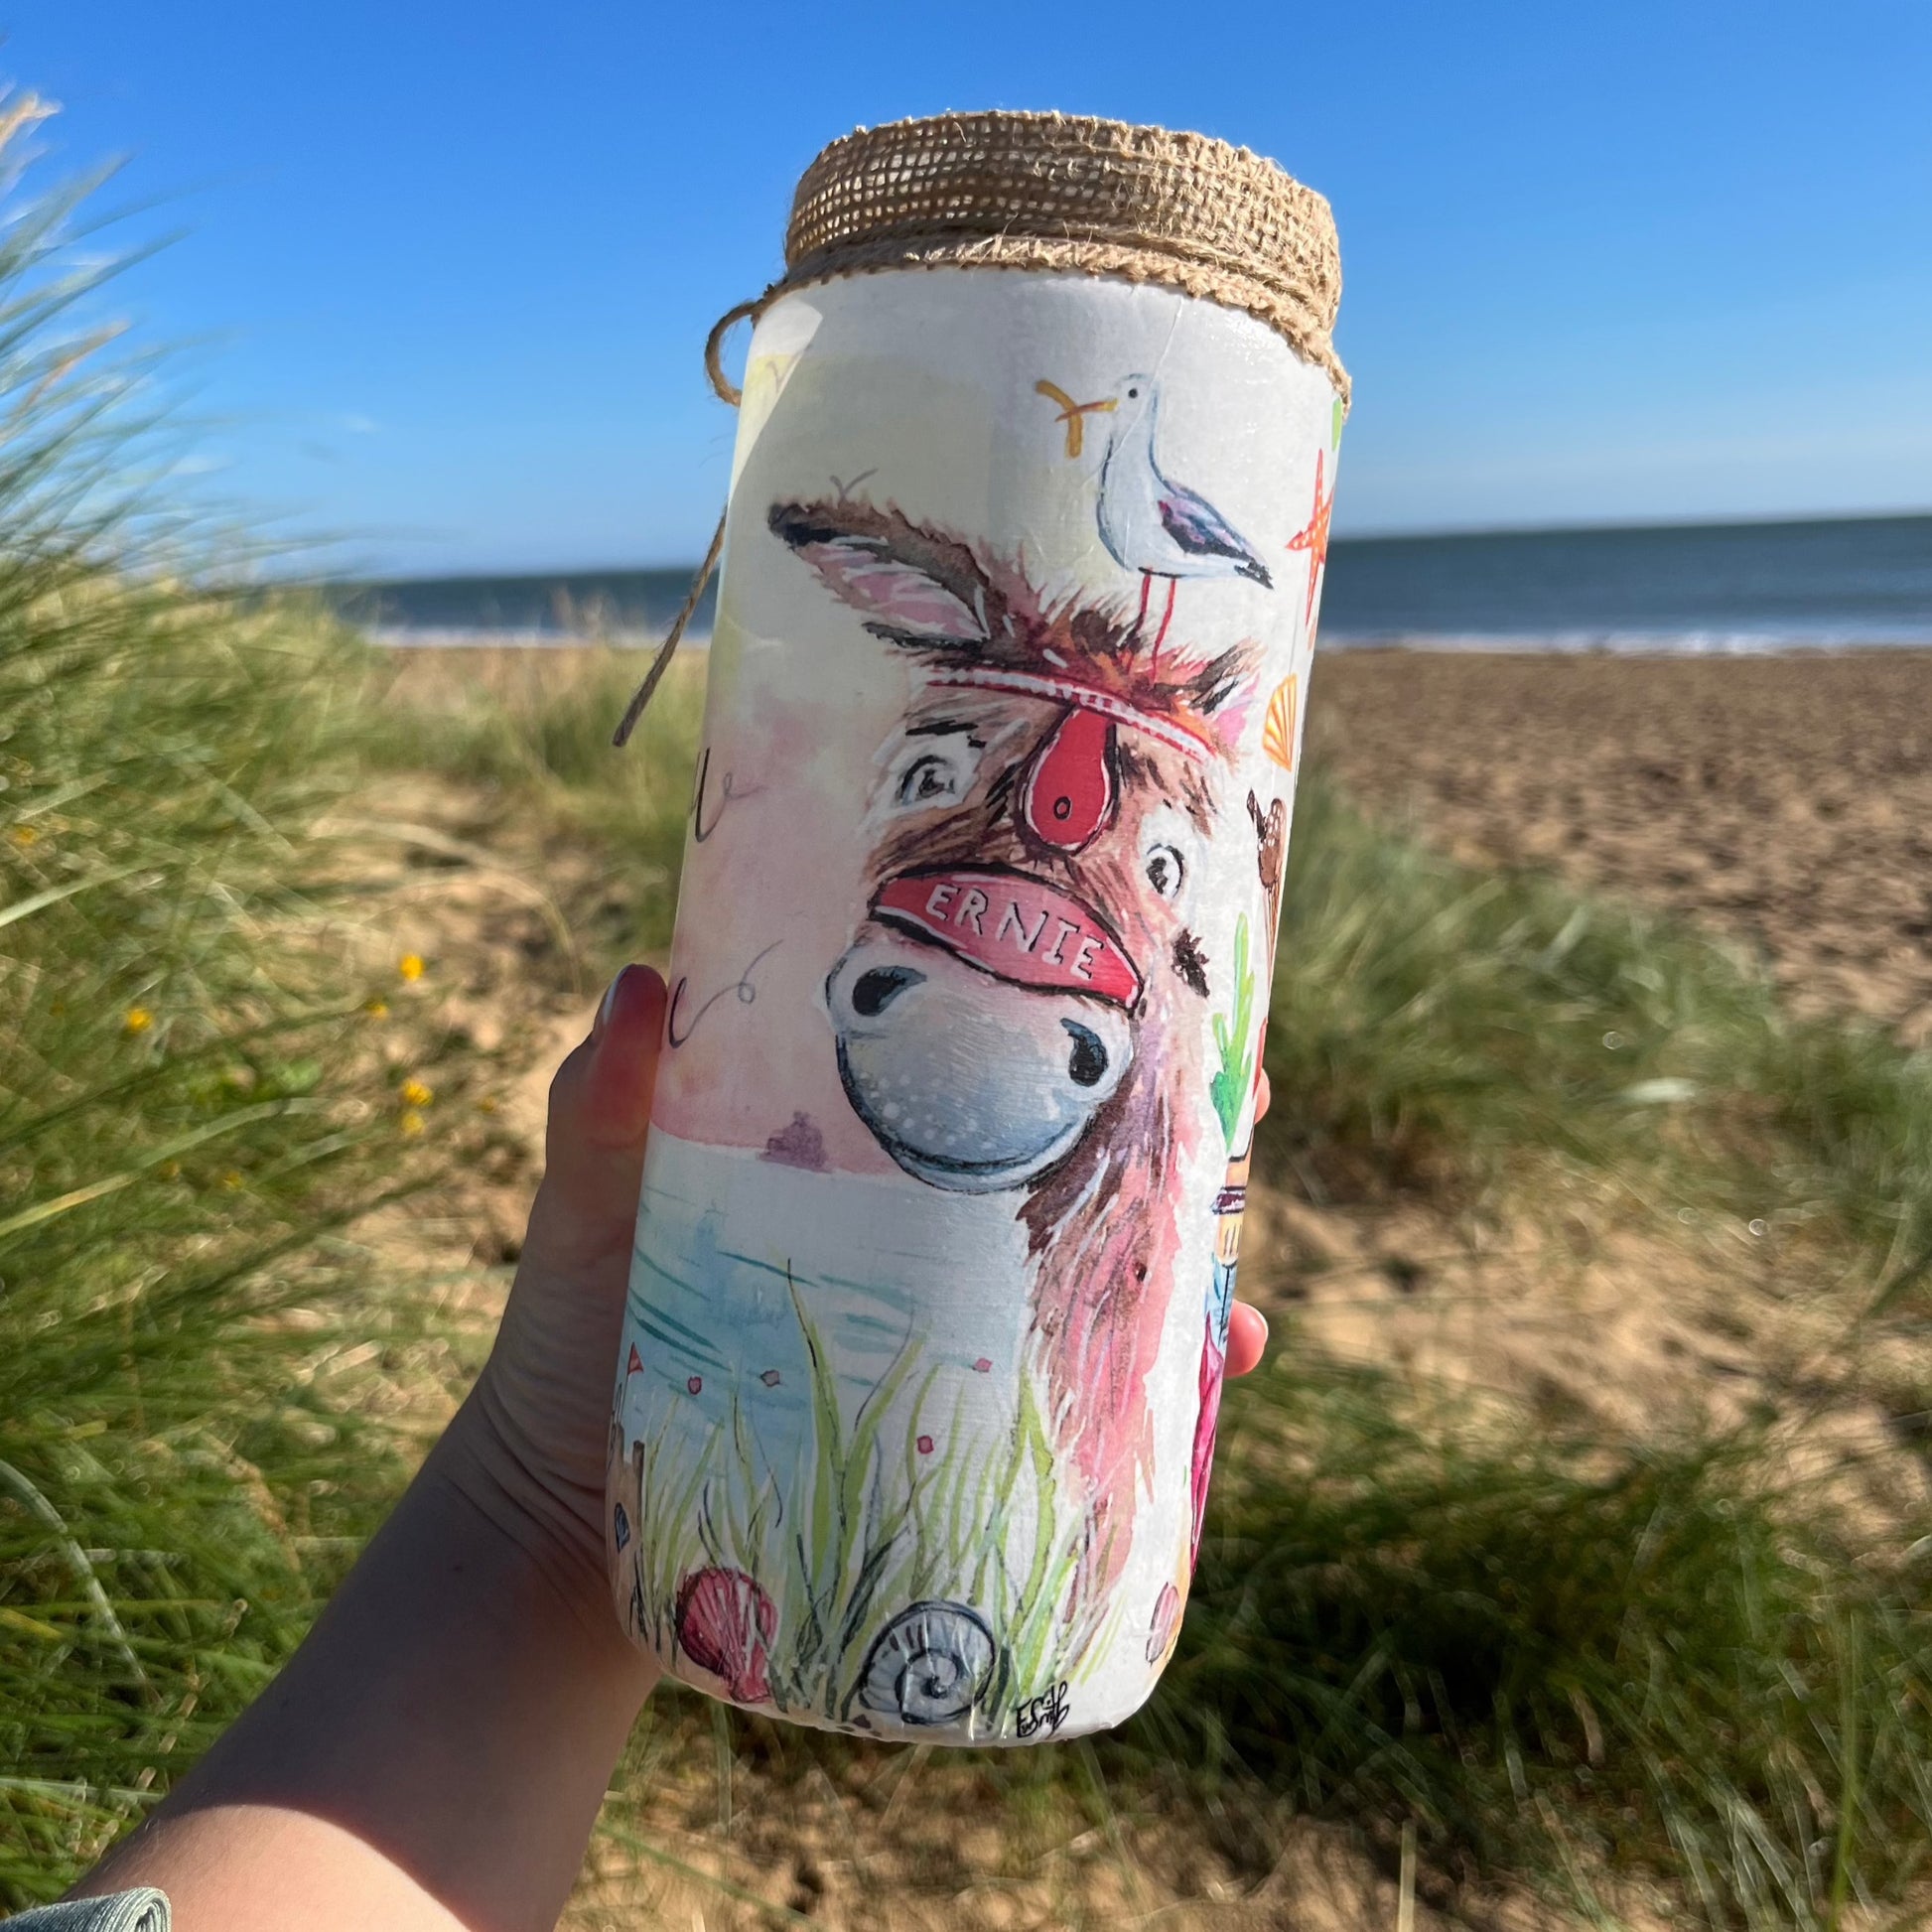 A decoupaged jar on Cleethorpes beach featuring watercolour artwork of a donkey by local artist, Eve Leoni Smith. 